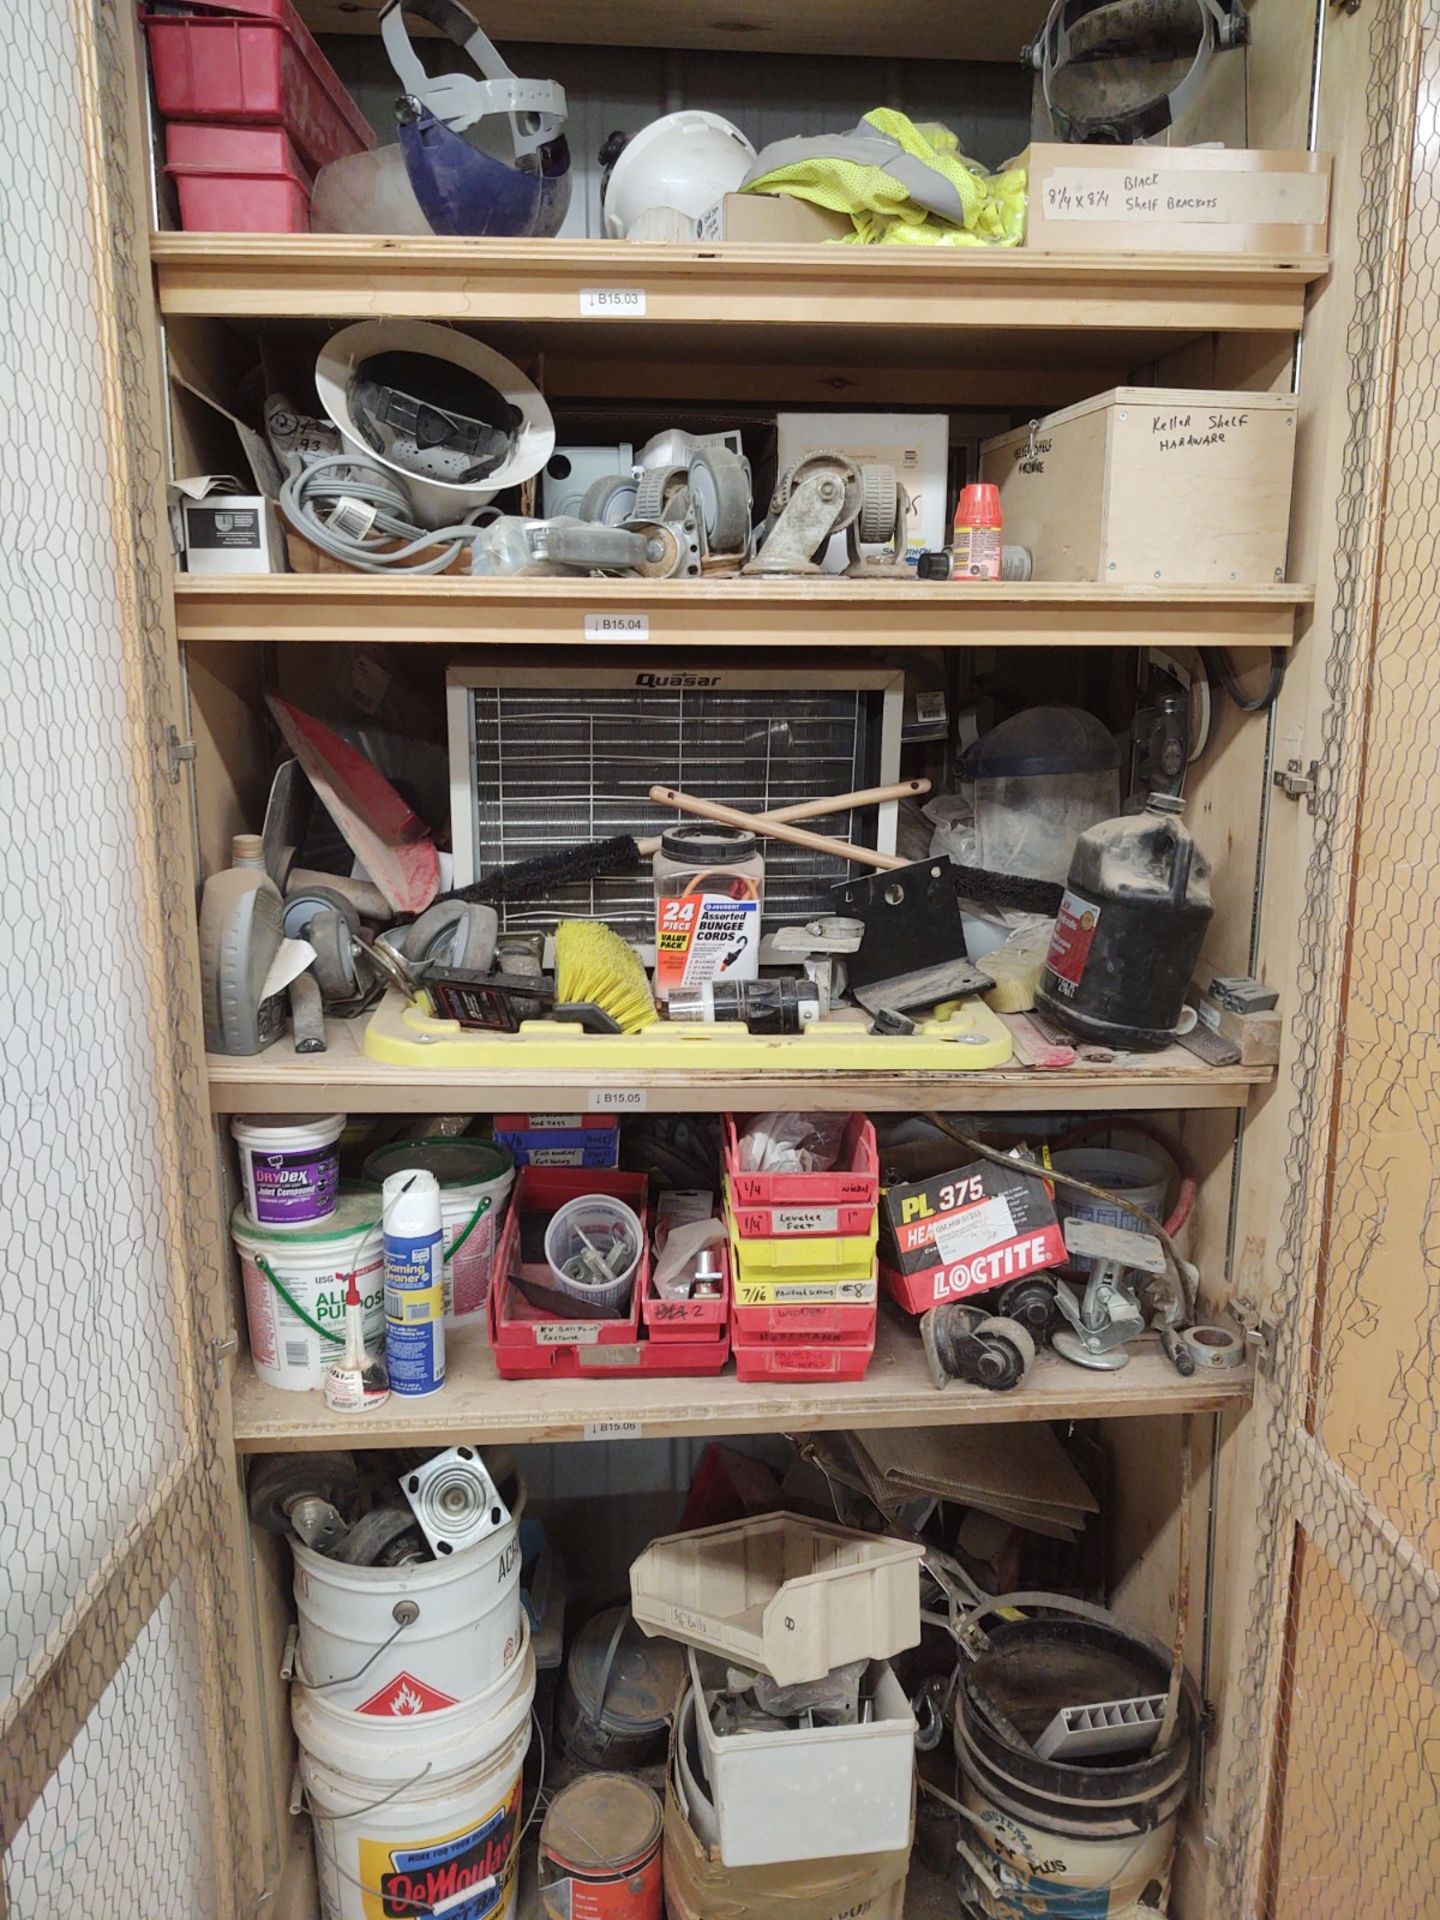 (Lot) In and On 4 Cabinets C/o Asst. Supplies (Inspection Urged) - Image 7 of 7